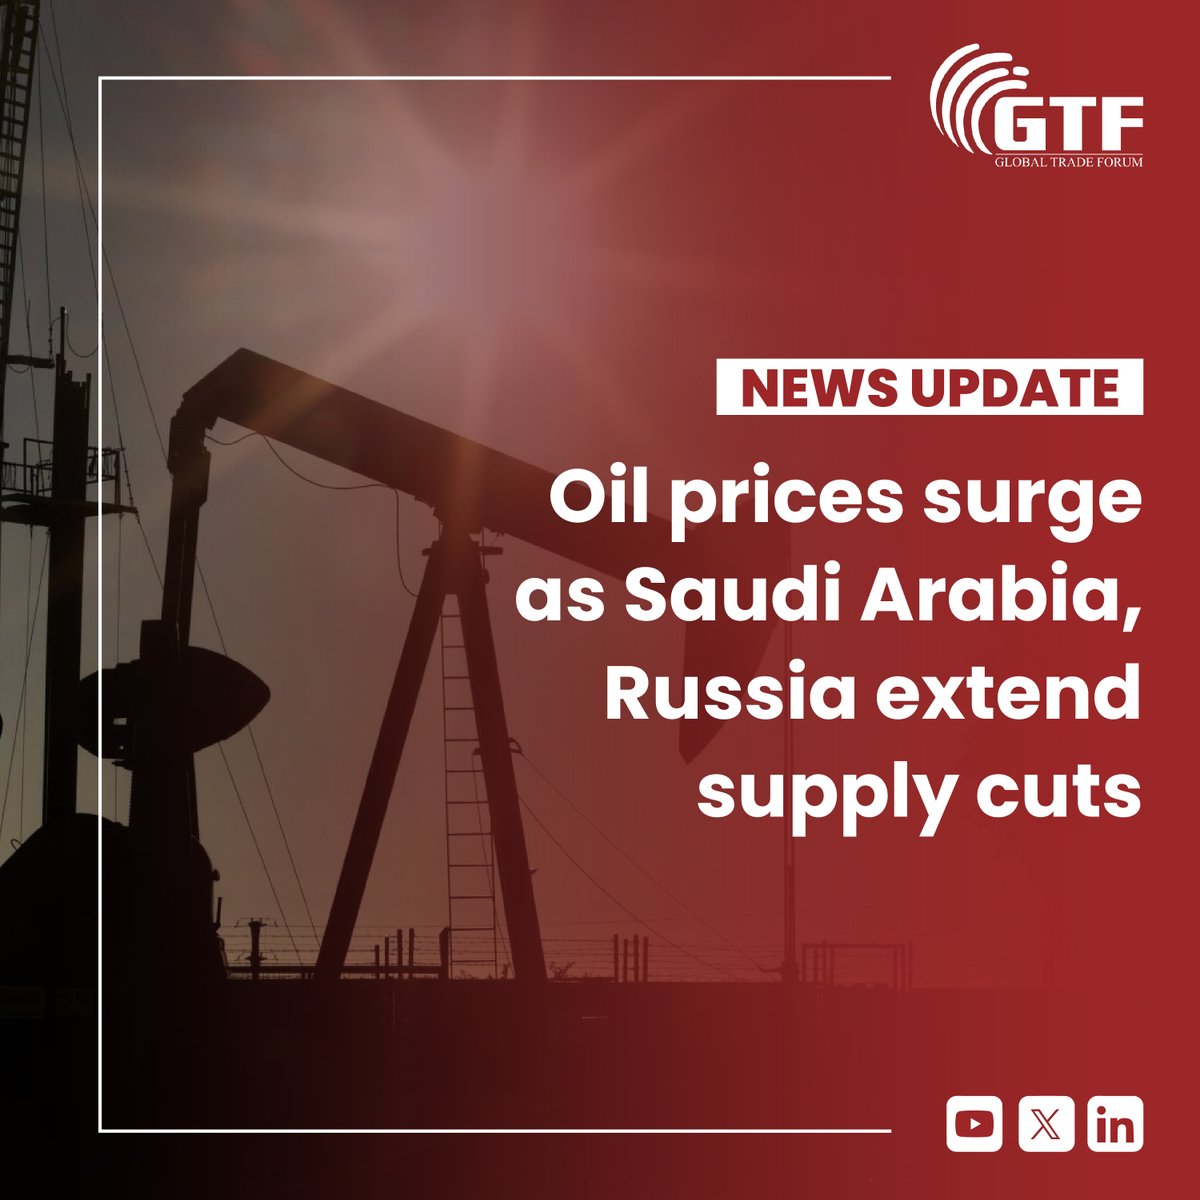 Oil prices surged on Tuesday after Saudi Arabia and Russia announced that they would extend their supply cuts through the end of the year.

#OilPrices #SaudiArabia #Russia #SupplyCuts #GlobalOilMarket #EconomicGrowth #Inflation #FoodPrices #gtf #globaltradeforum